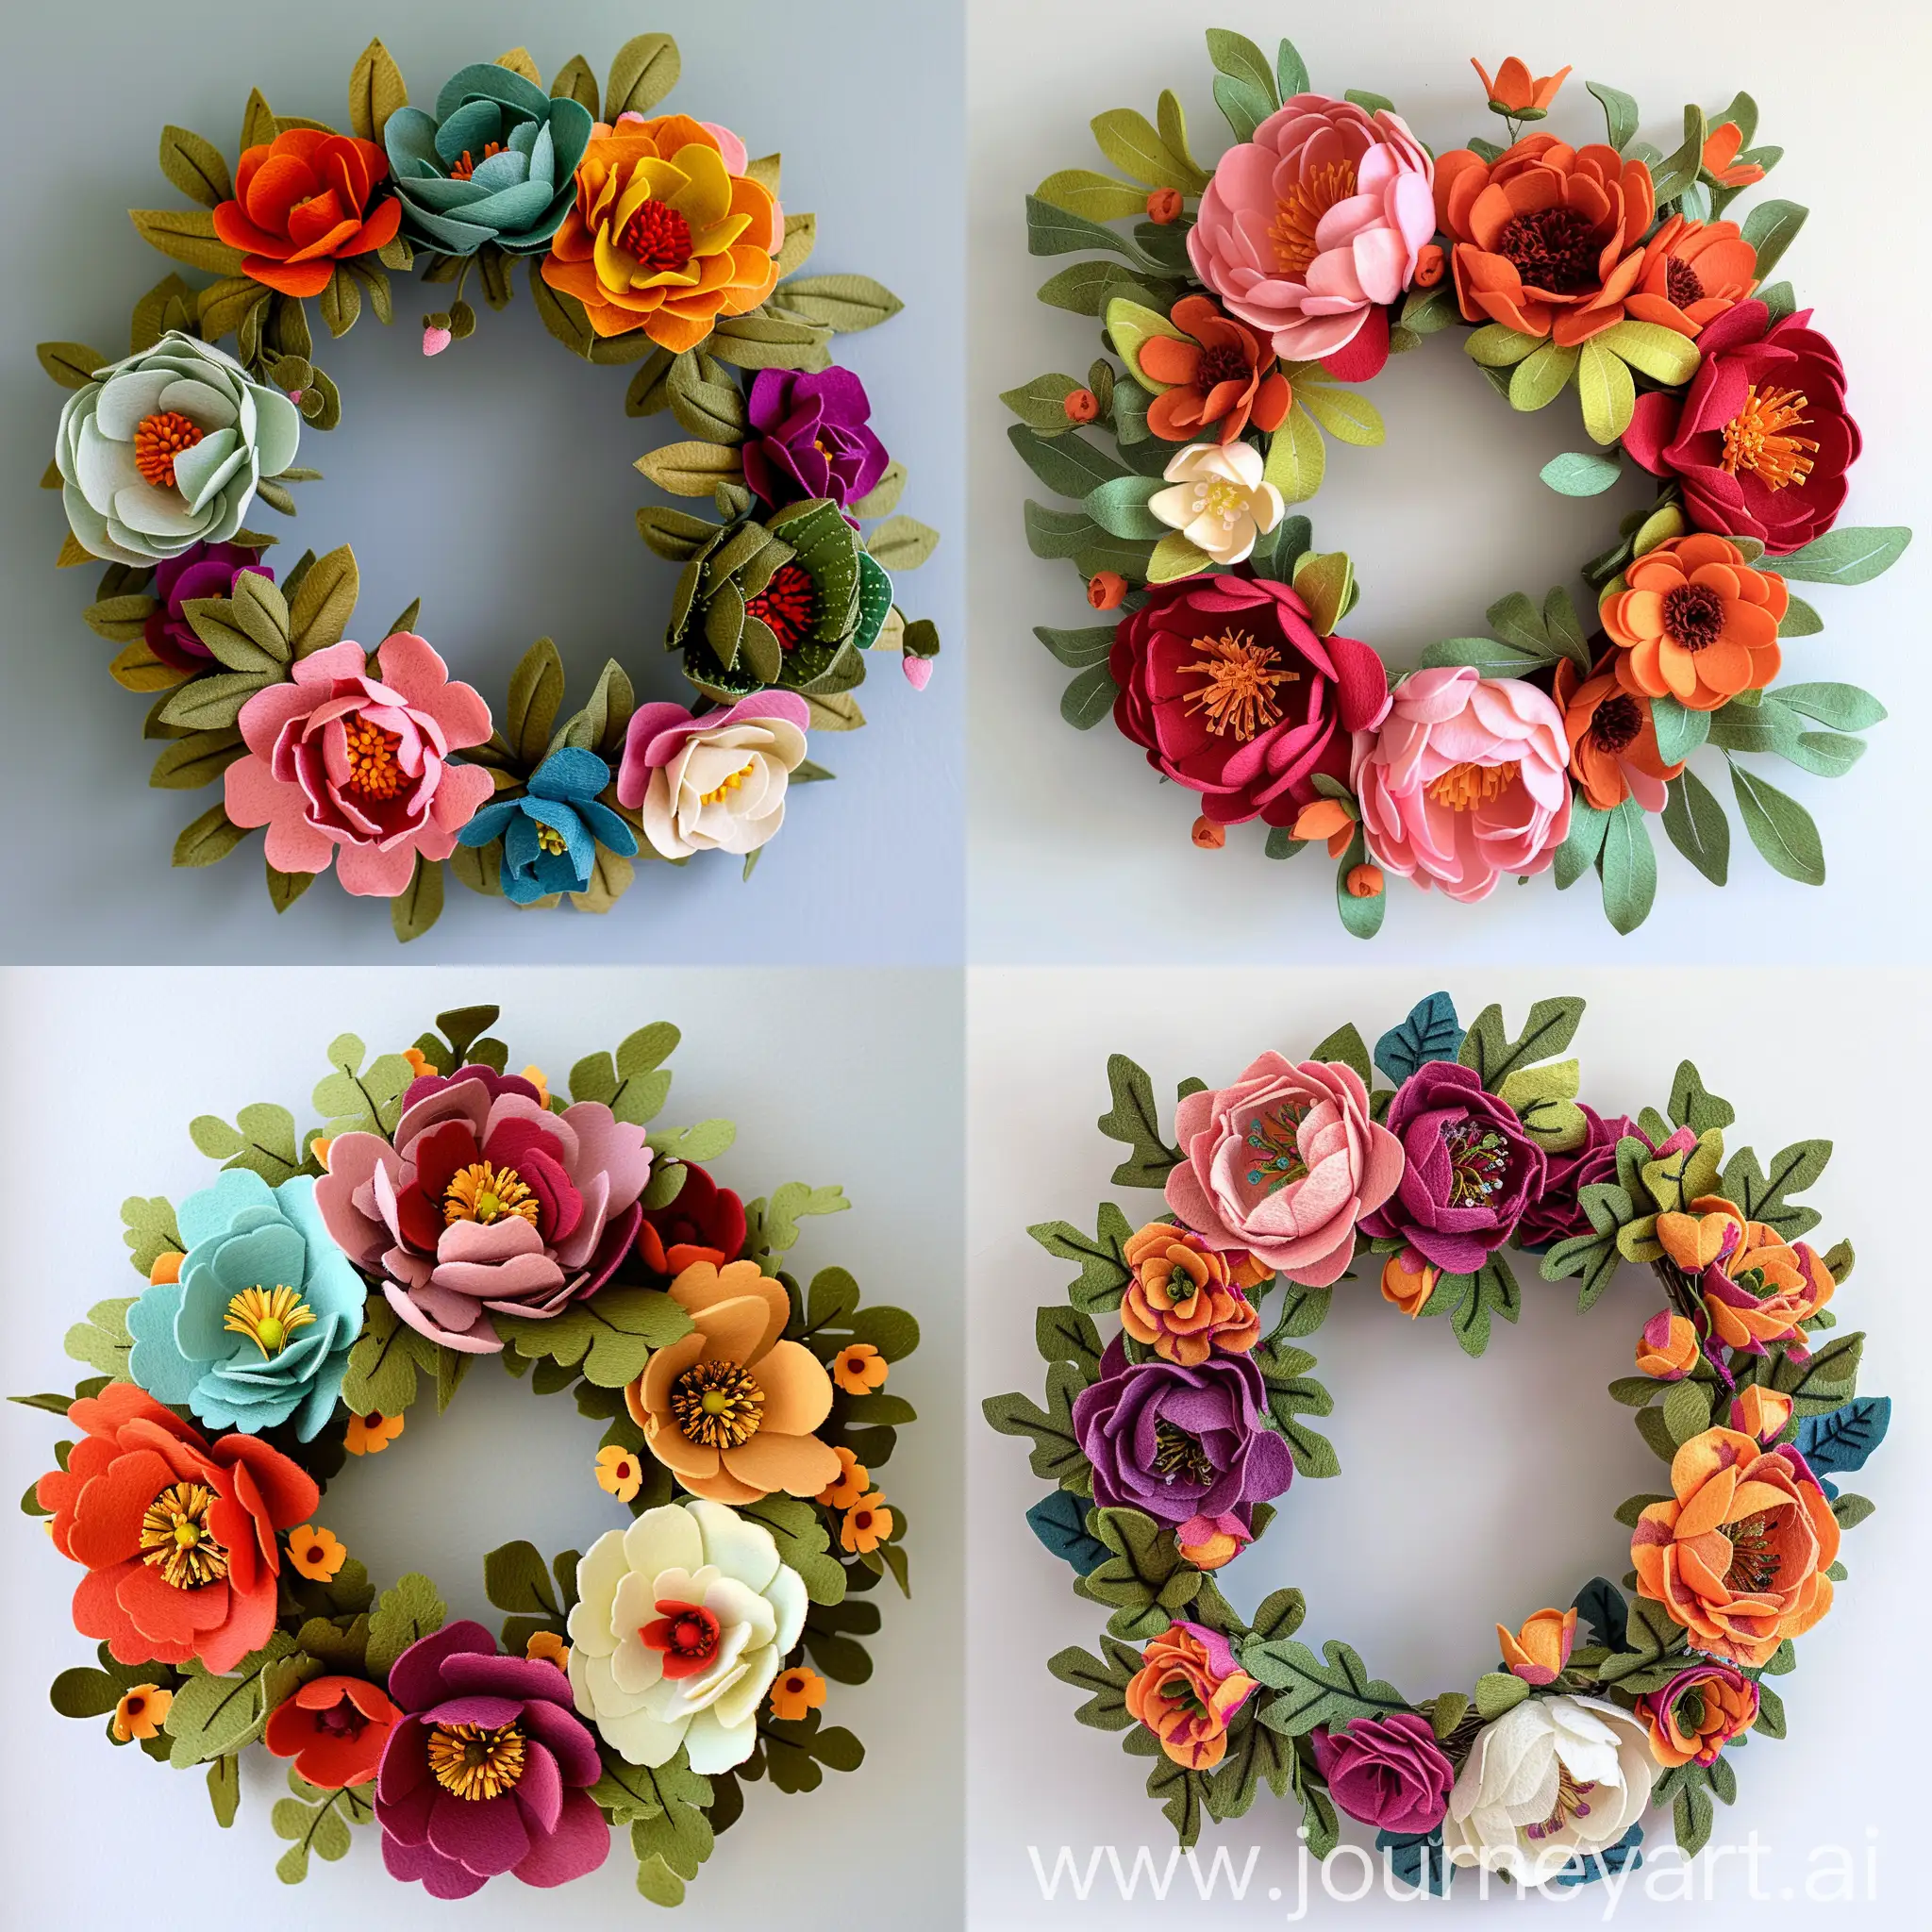 Symmetrical-Felt-Wreath-with-Peony-and-Poppy-Blossoms